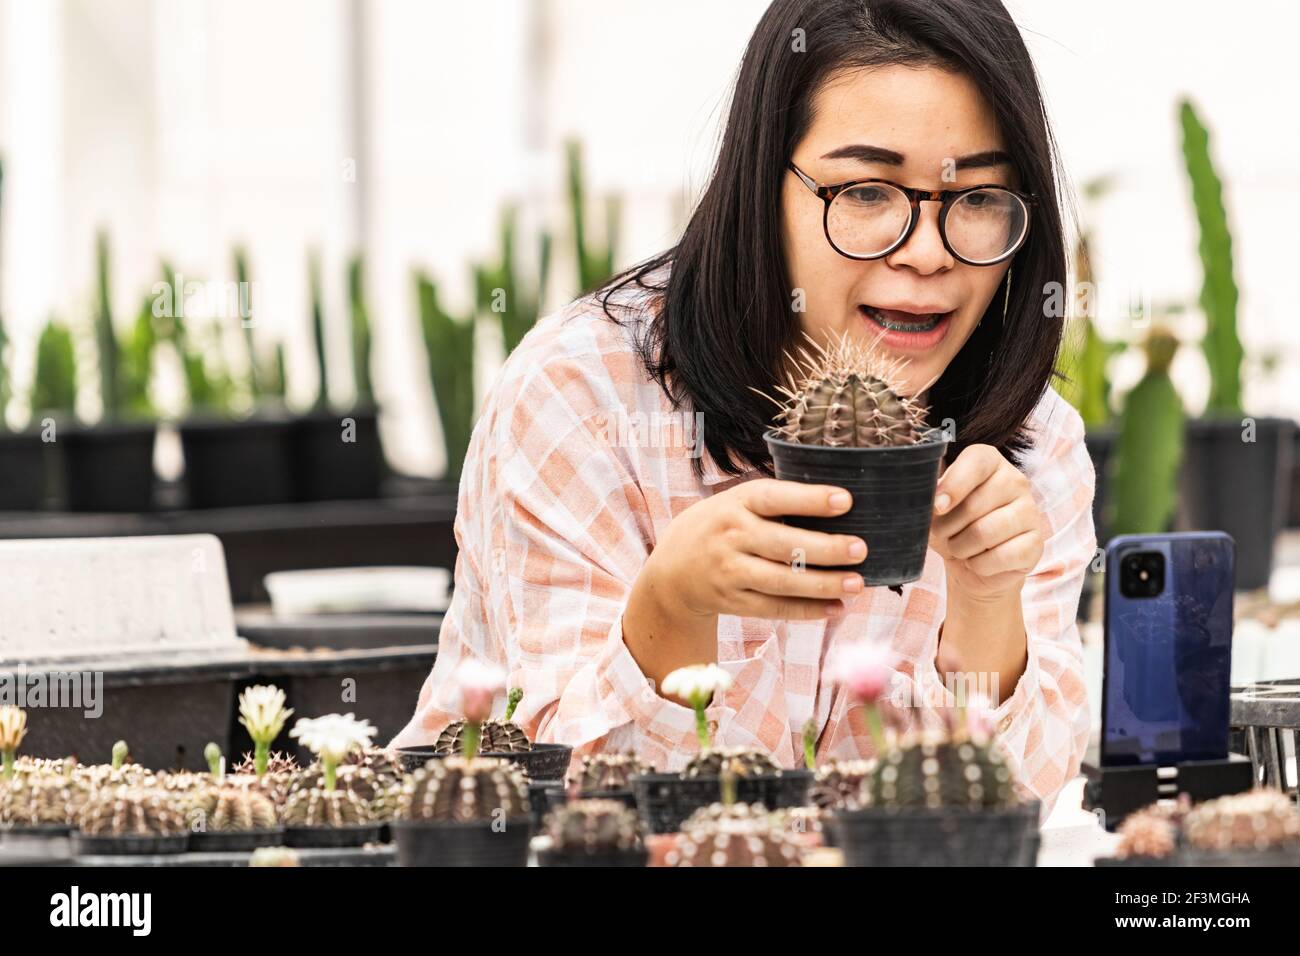 Authentic Asian women are live-streaming cactus sales. A beautiful Asian woman speaks and looks at her smartphone for selling products. Stock Photo